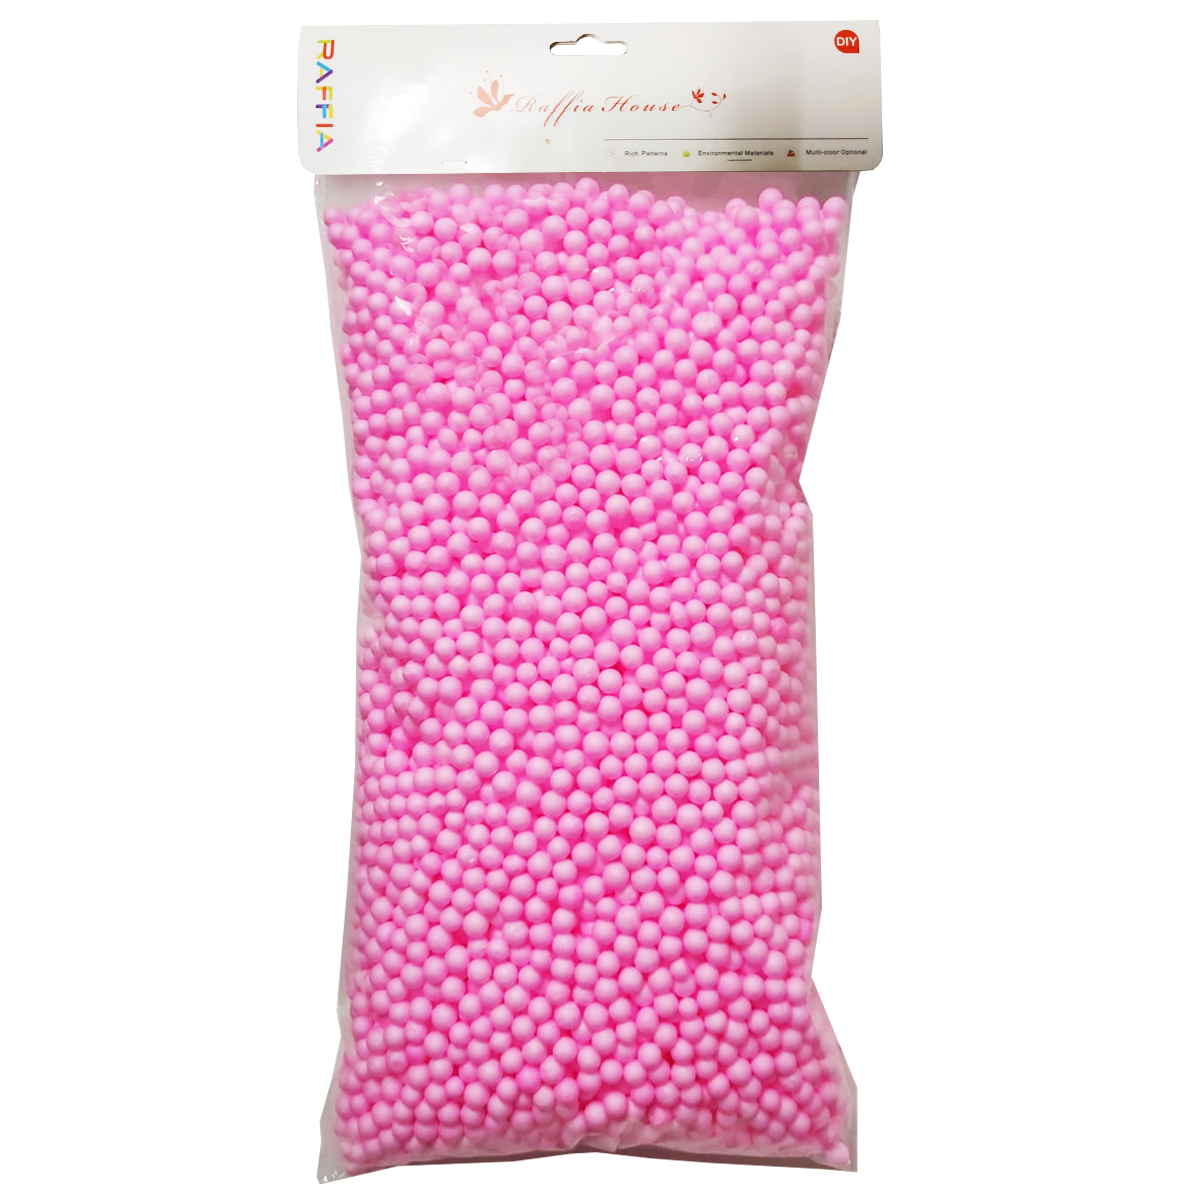 Thermocol Colourful Confetti Balls For Gift Box Filling 50g - Pink